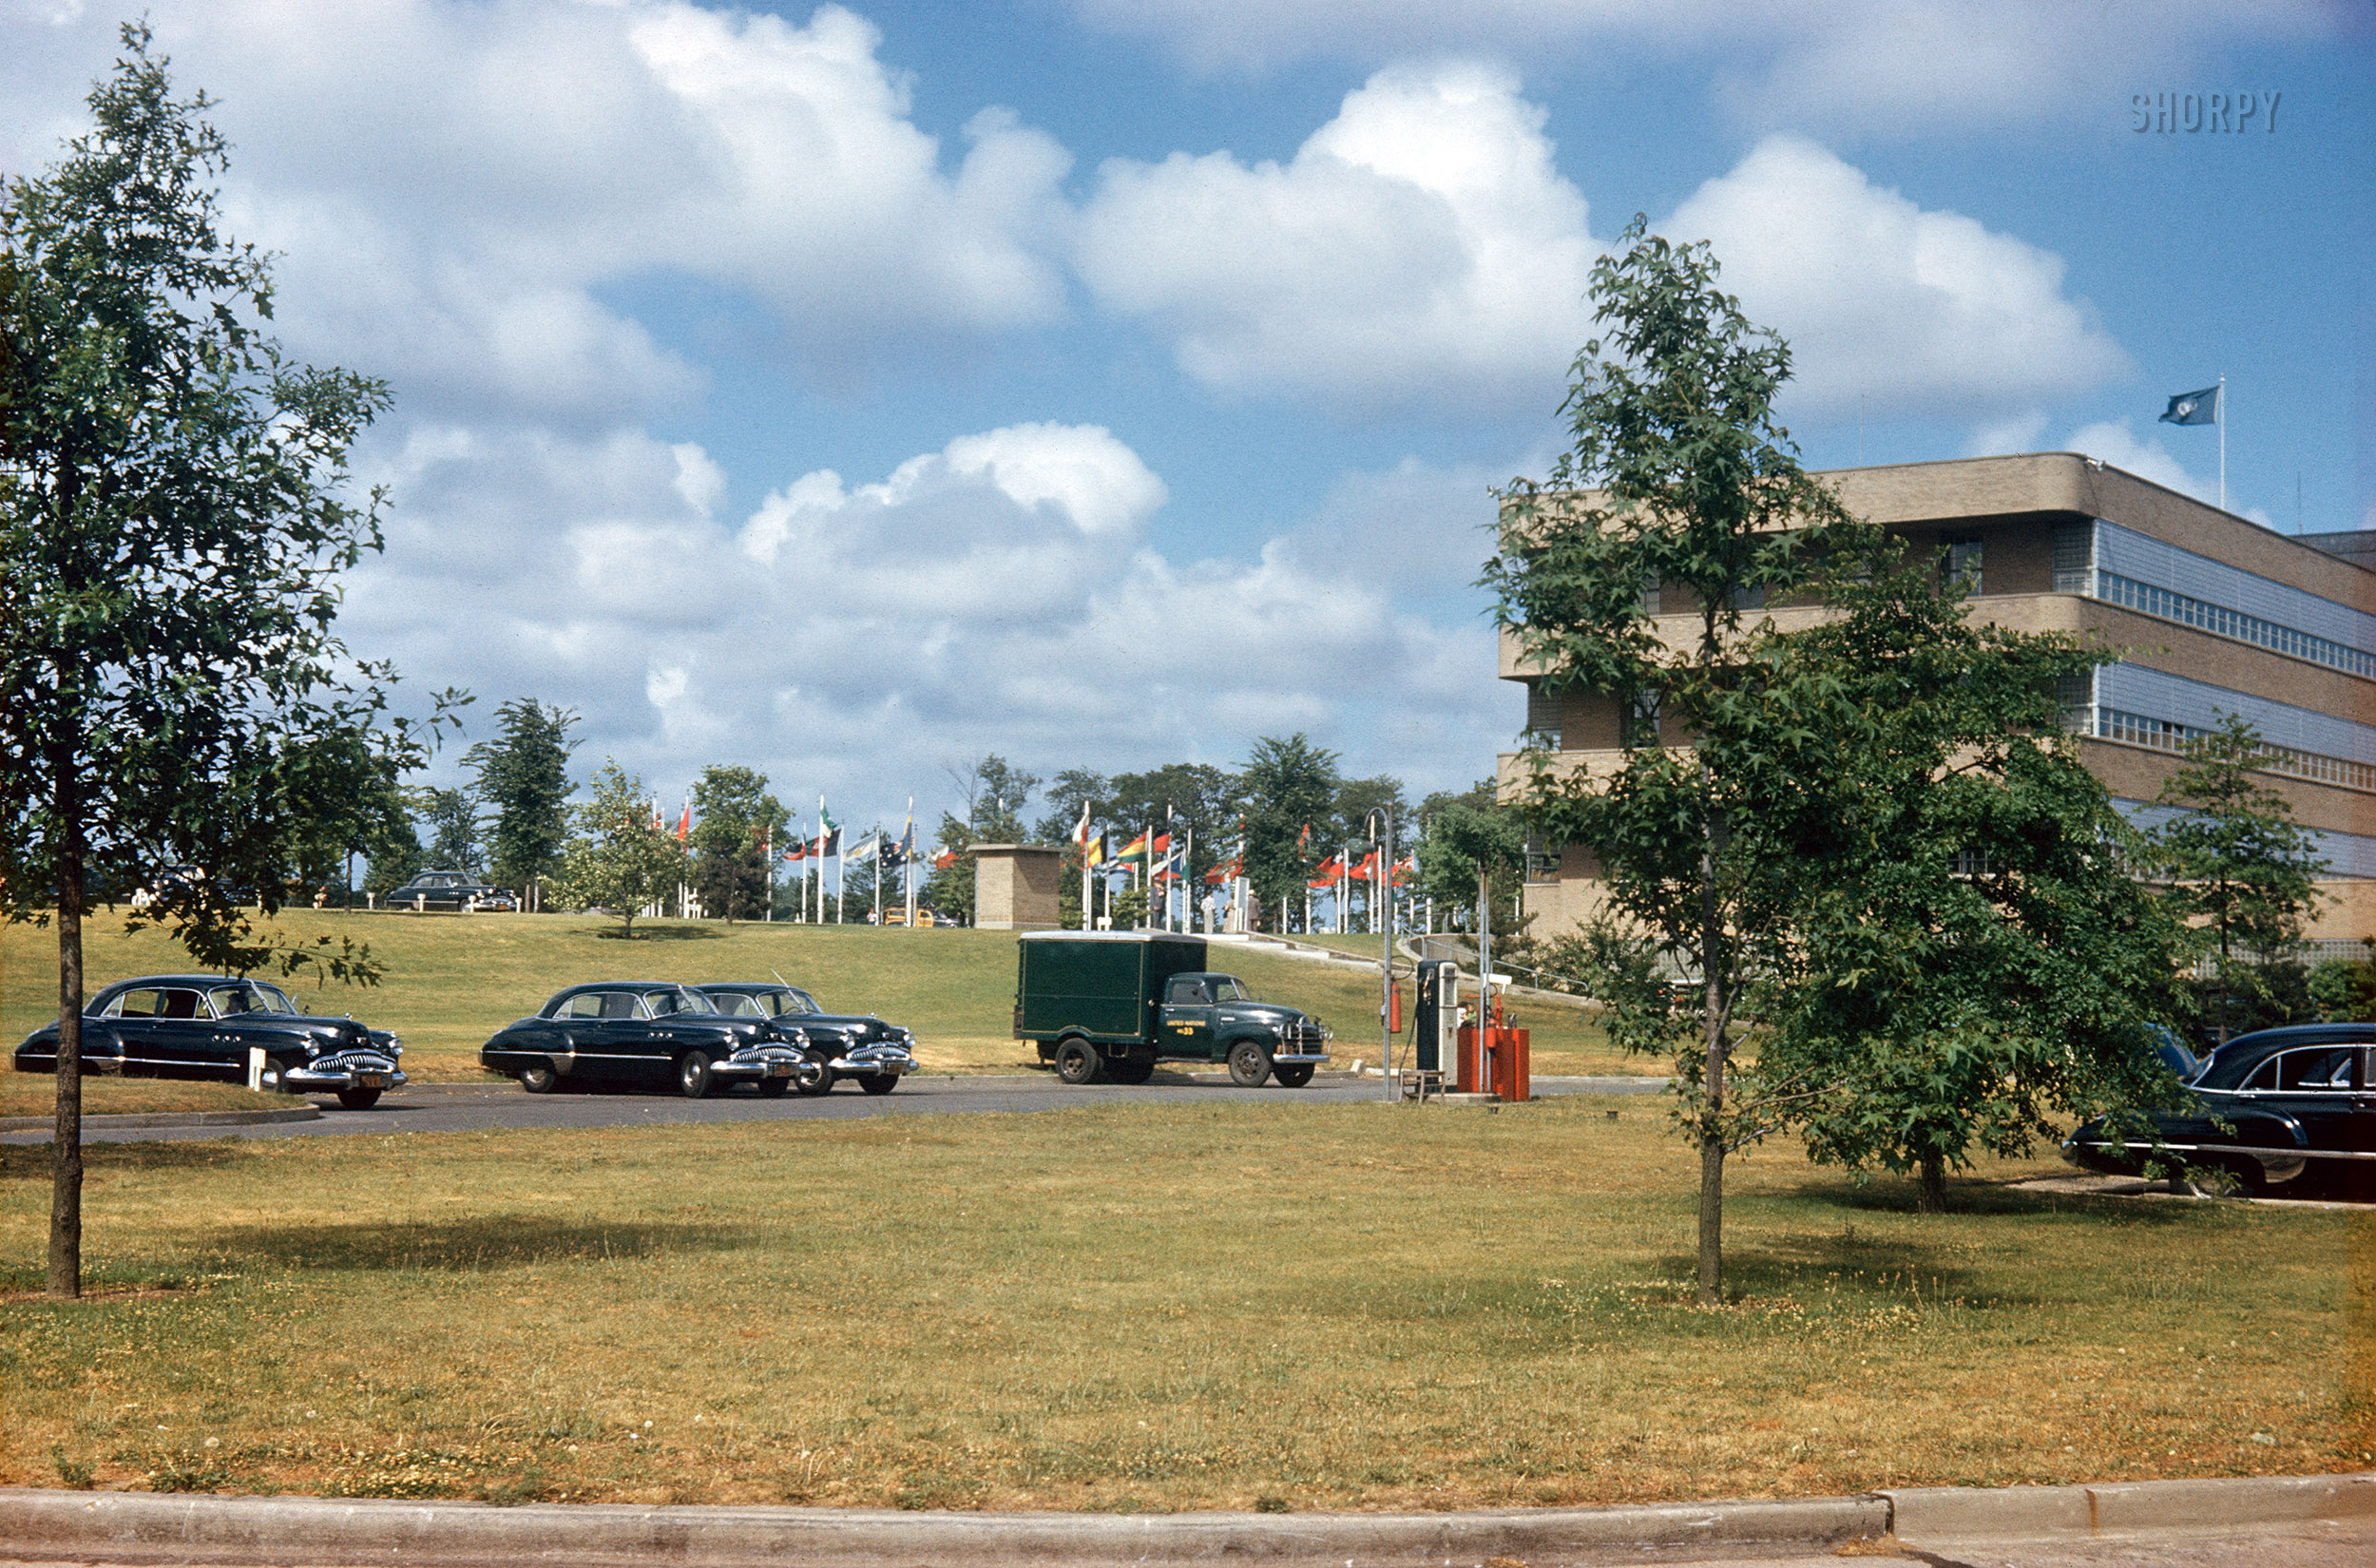 Circa 1949. "United Nations, Lake Success, New York." The organization's temporary headquarters at the Sperry Gyroscope industrial park on Long Island, along with its fleet of black Buick Super sedans. 35mm Kodachrome transparency. View full size.